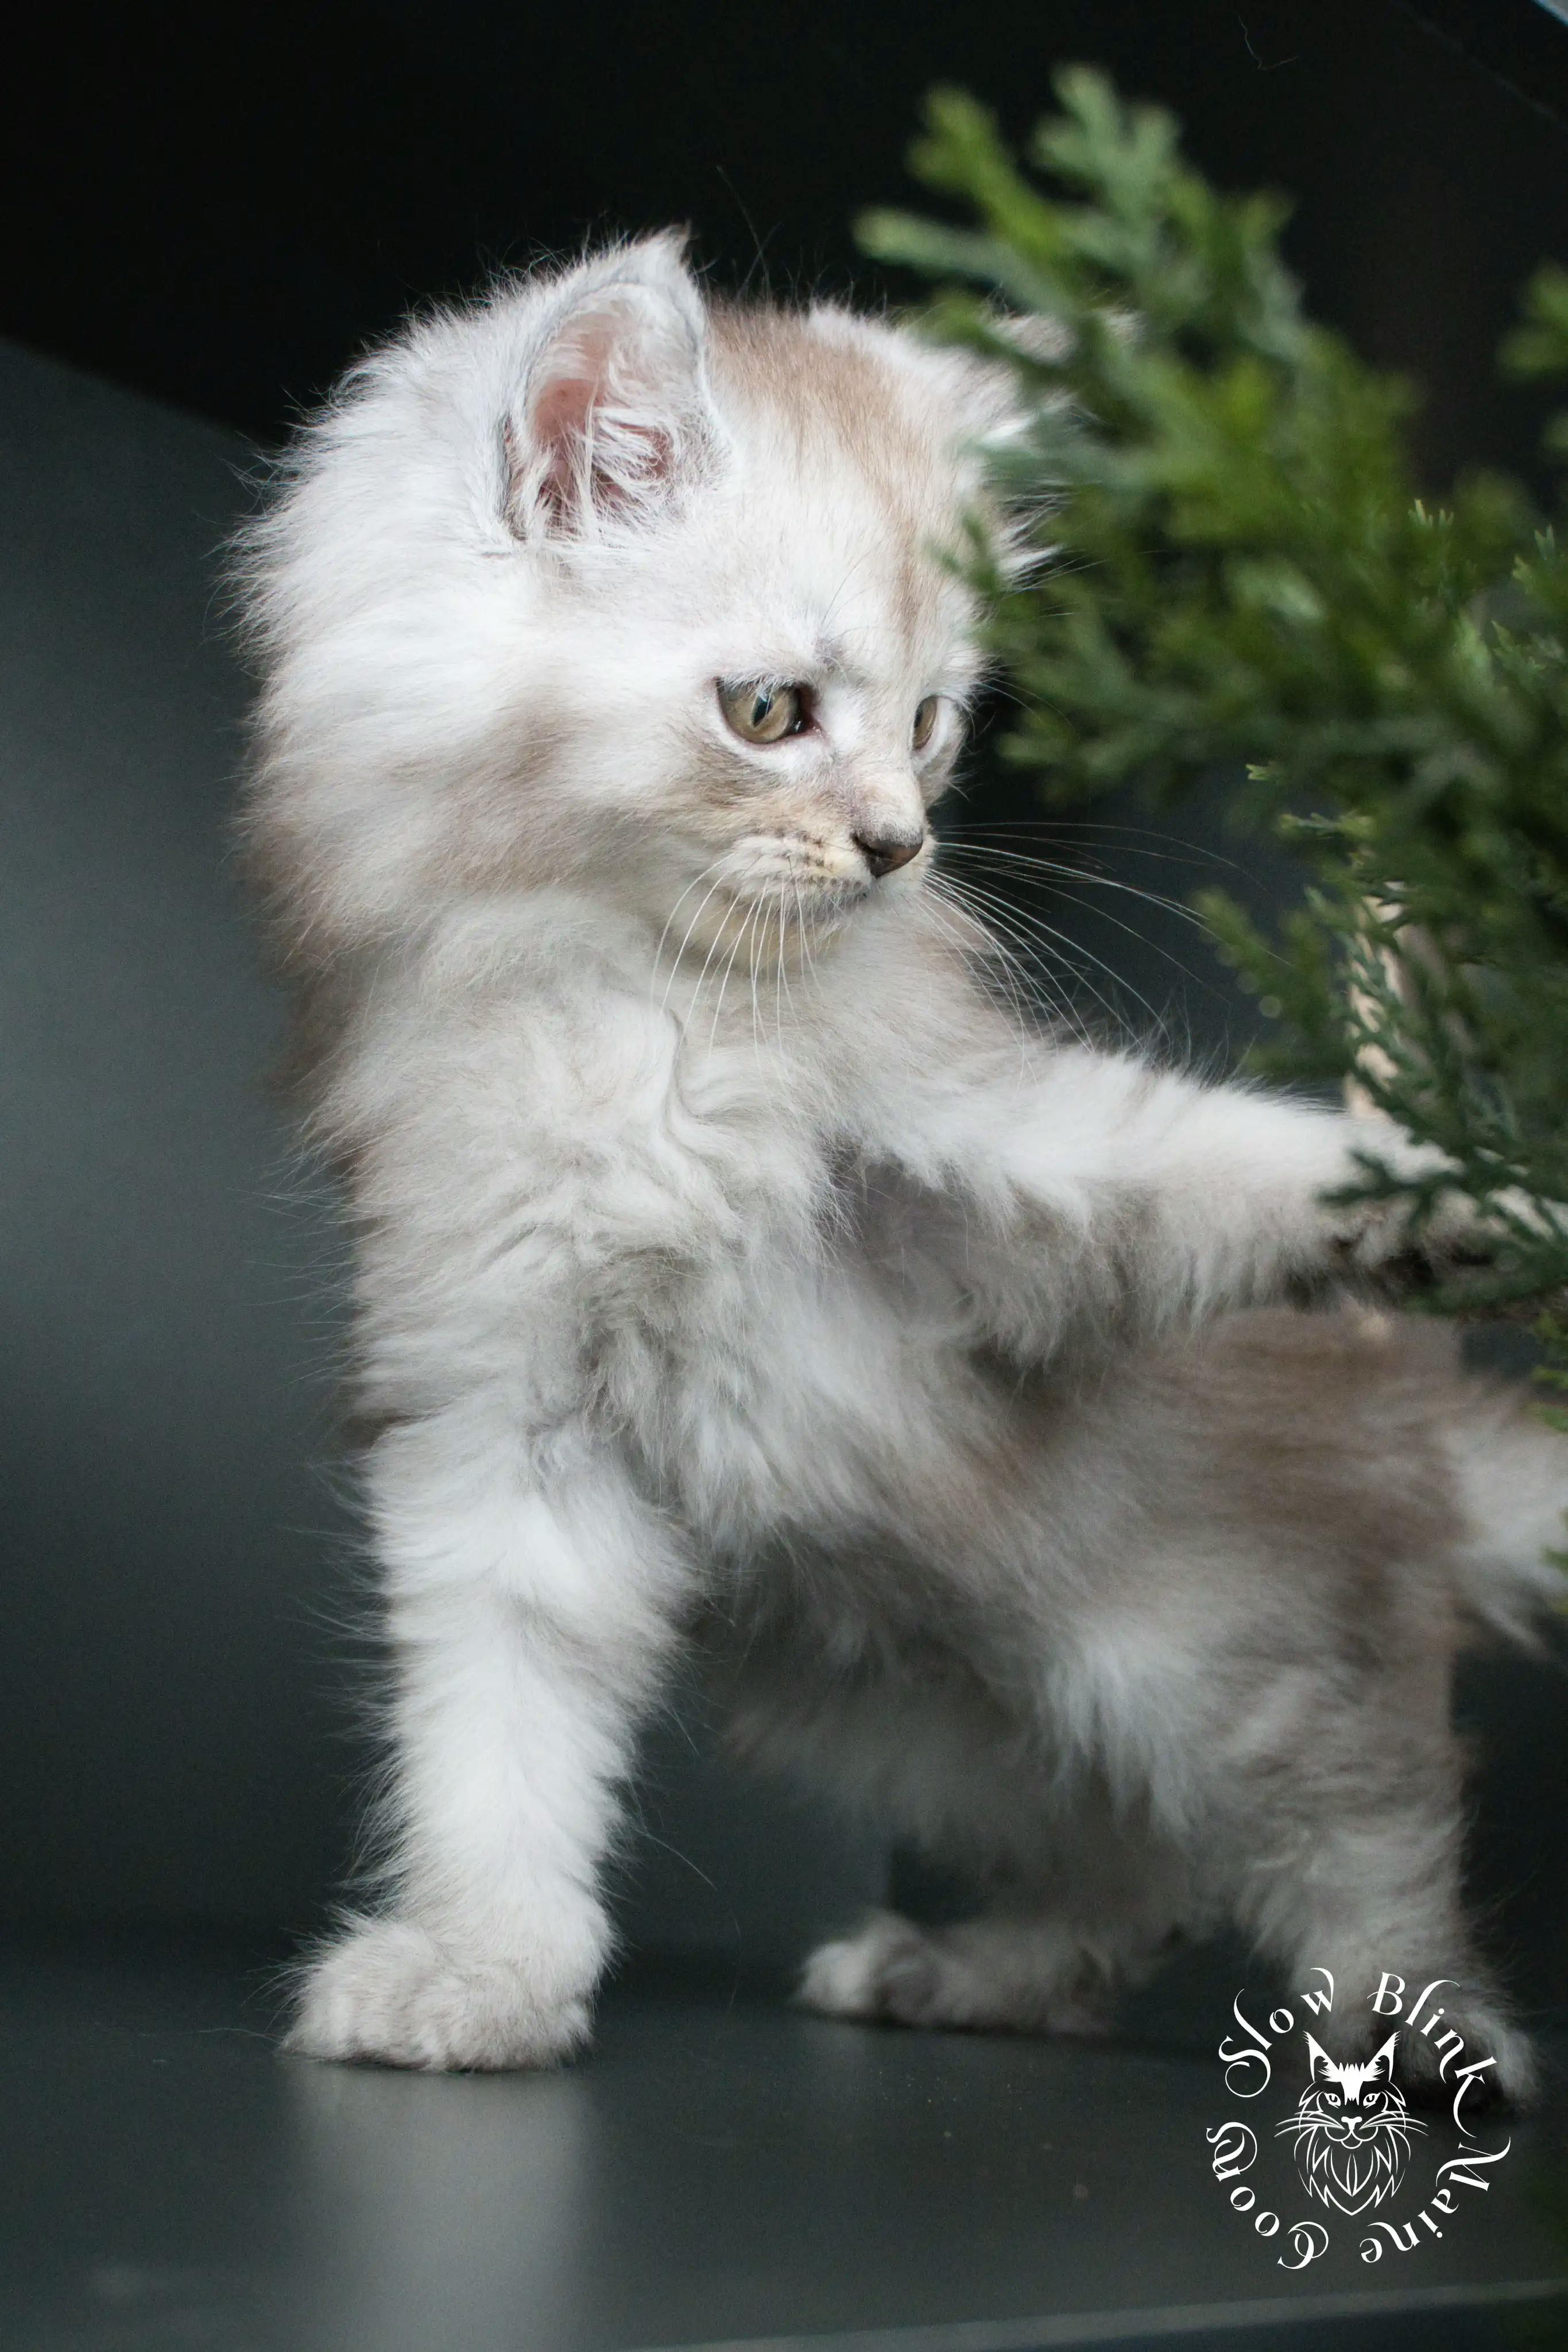 High Silver Maine Coon Kittens > black silver tabby maine coon kitten | ems code ns 22 23 24 25 | slowblinkmainecoons | 377